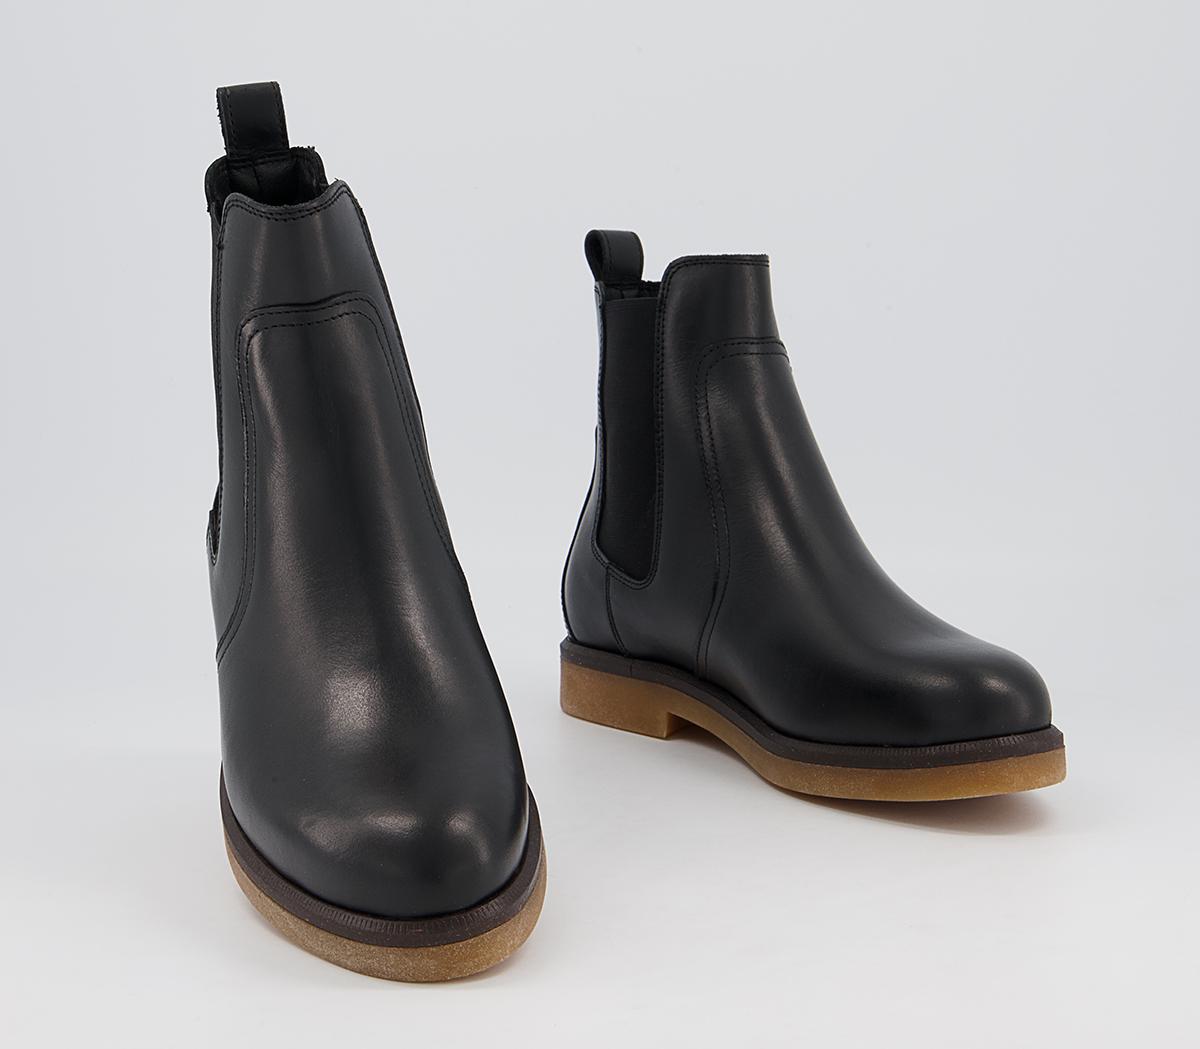 Timberland Cambridge Square Chelsea Boots Black - Women's Ankle Boots